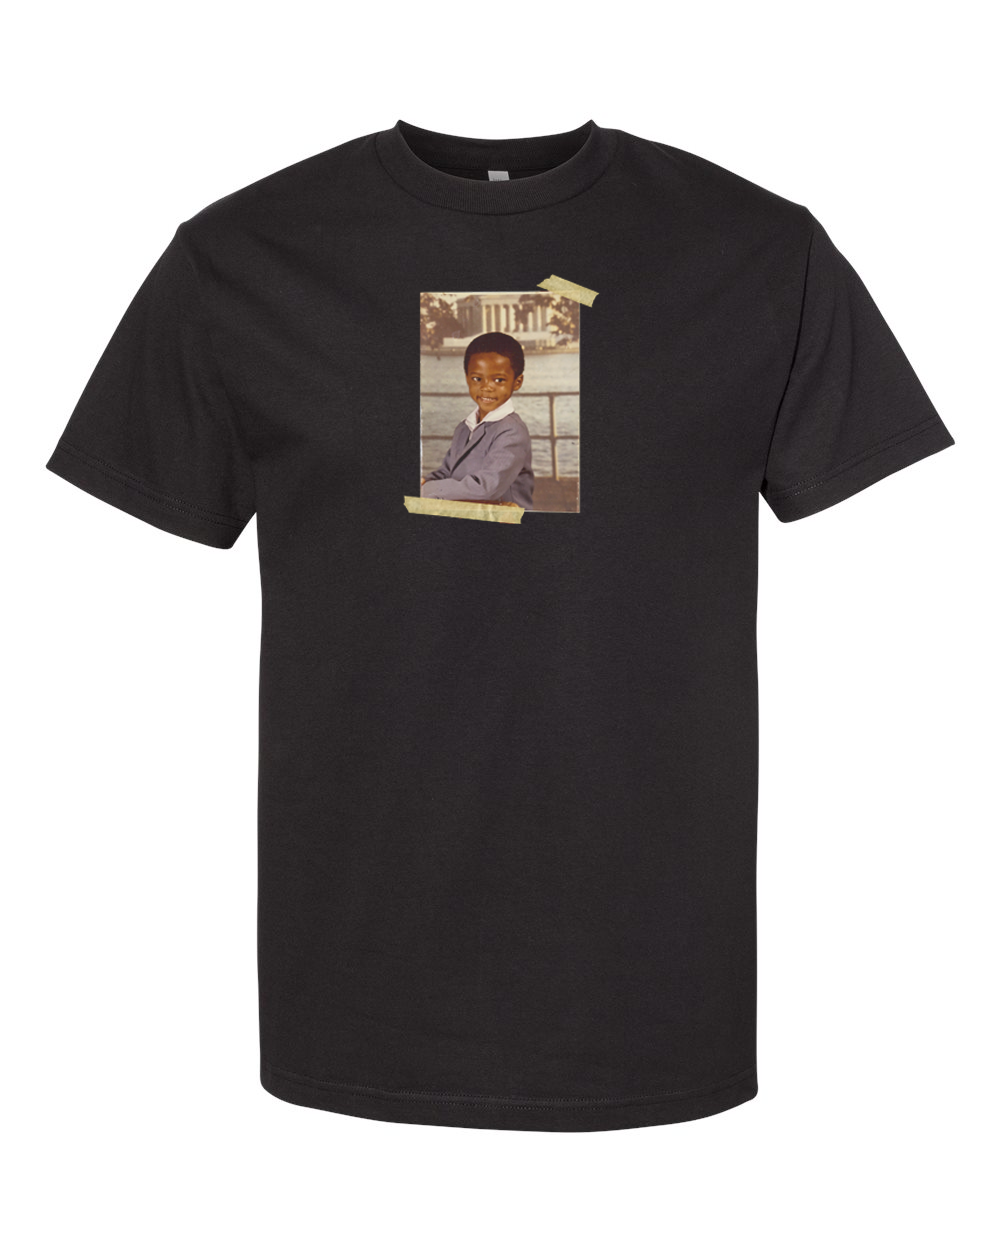 Papoose Photo - T-Shirt